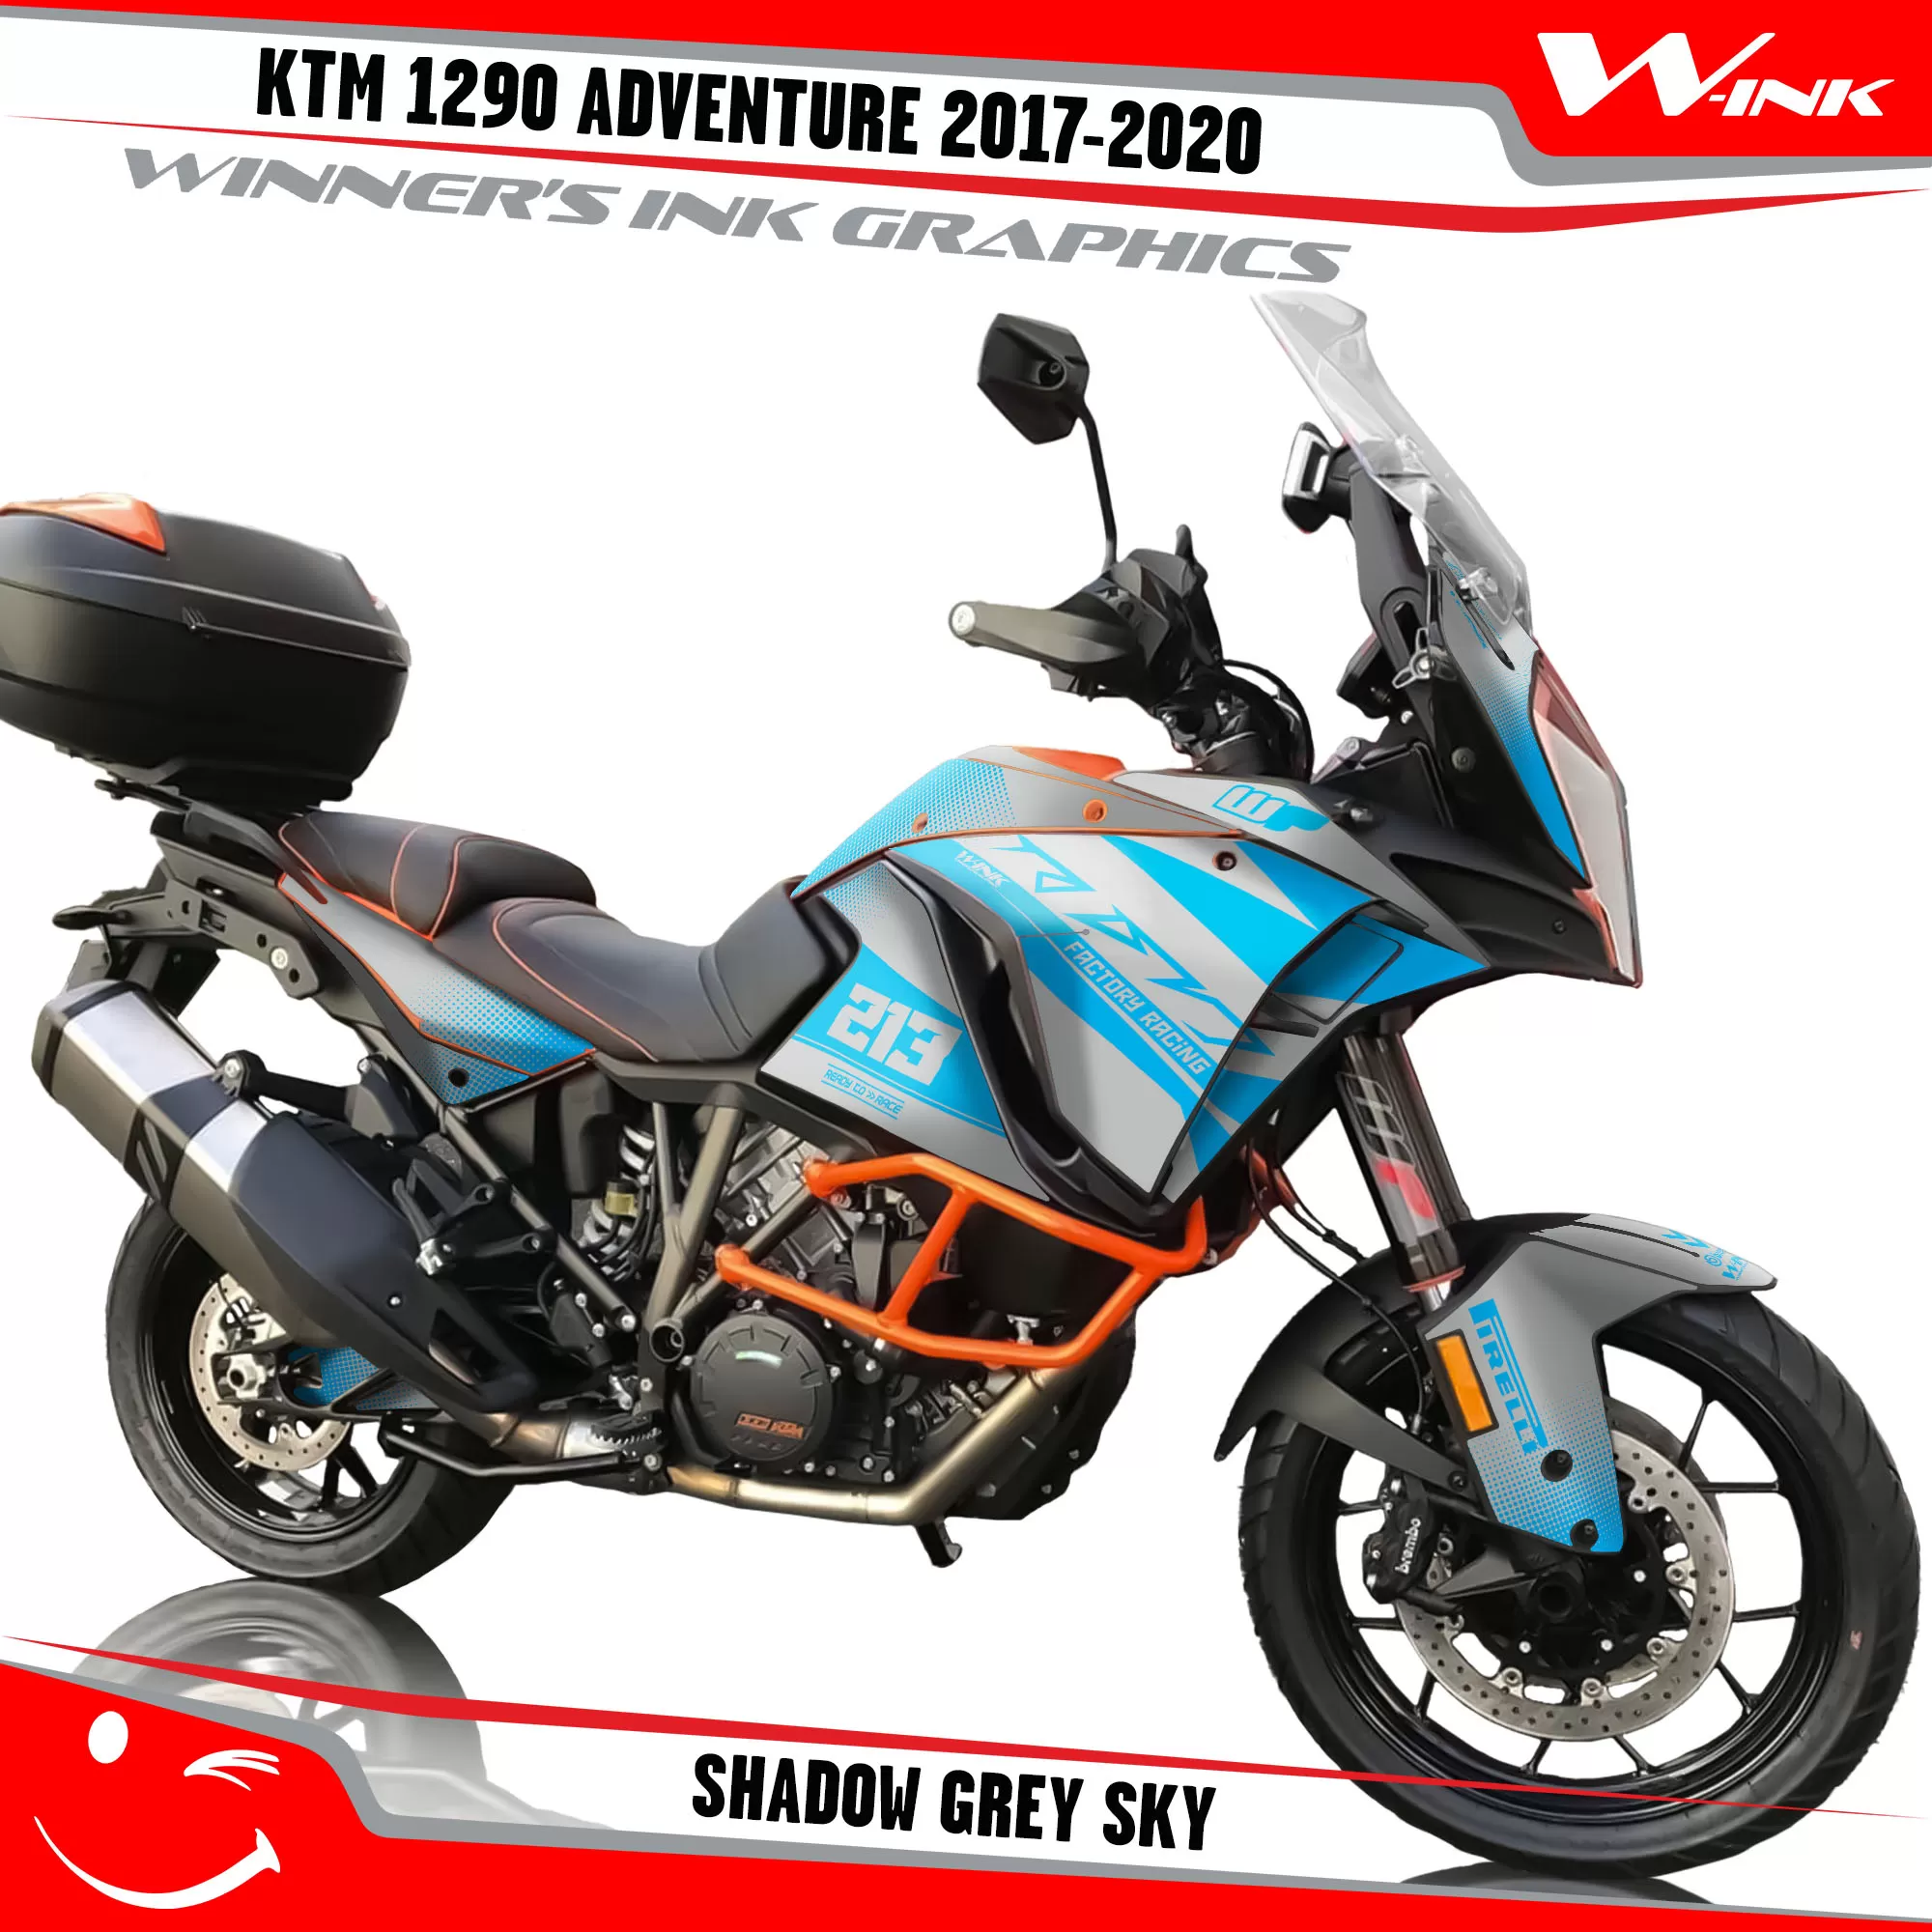 KTM-Adventure-1290-2017-2018-2019-2020-graphics-kit-and-decals-Shadow-Grey-Sky